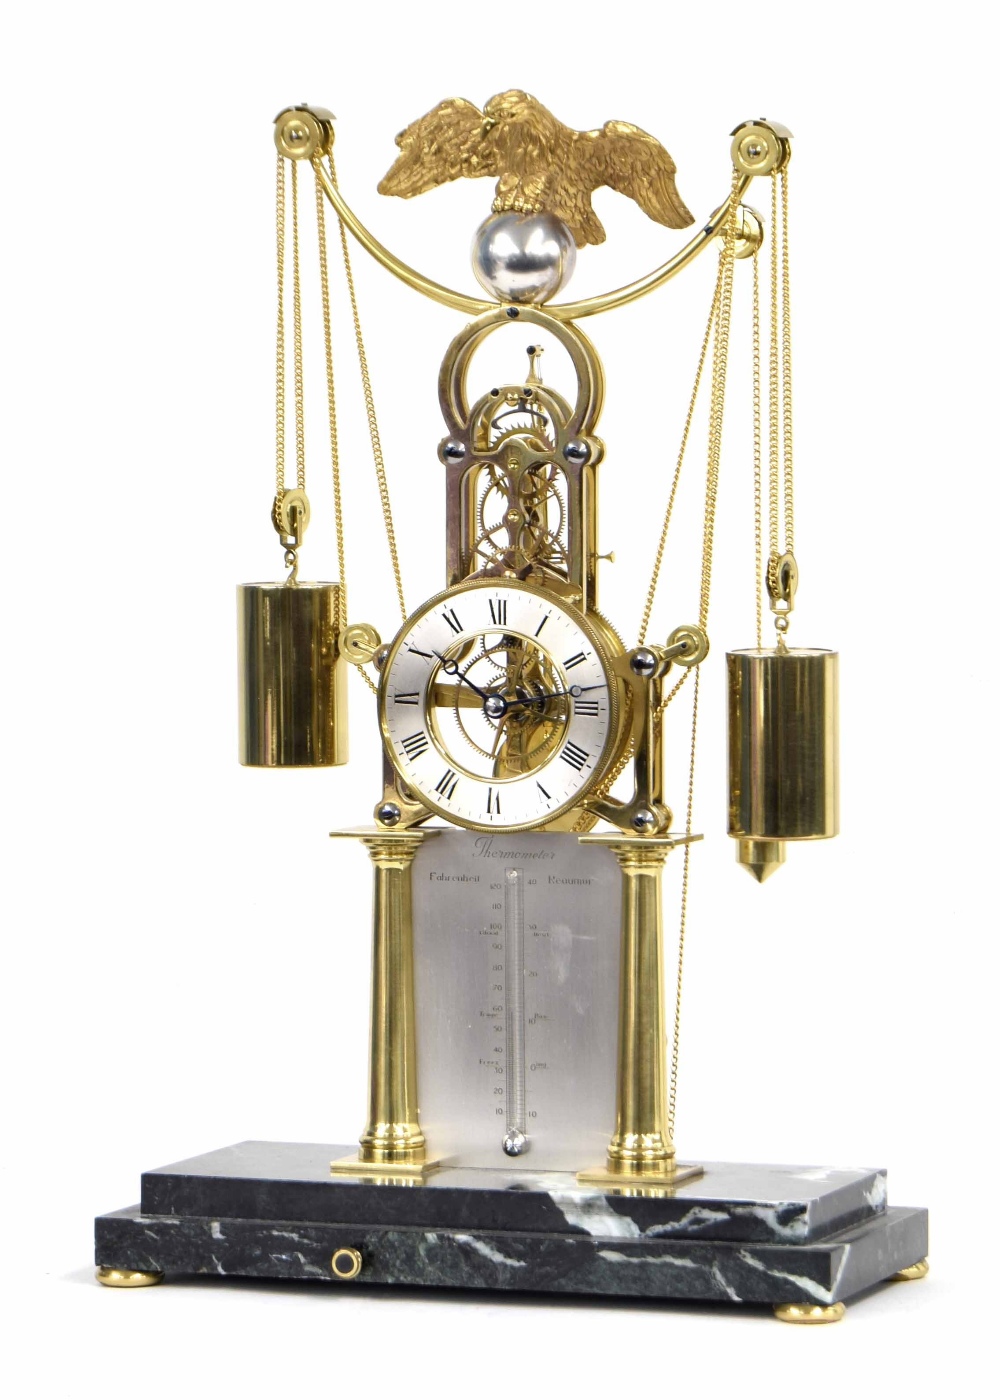 Unusual contemporary clock by and signed F.H. Whitlock, the 4" silvered chapter ring enclosing a - Image 2 of 2